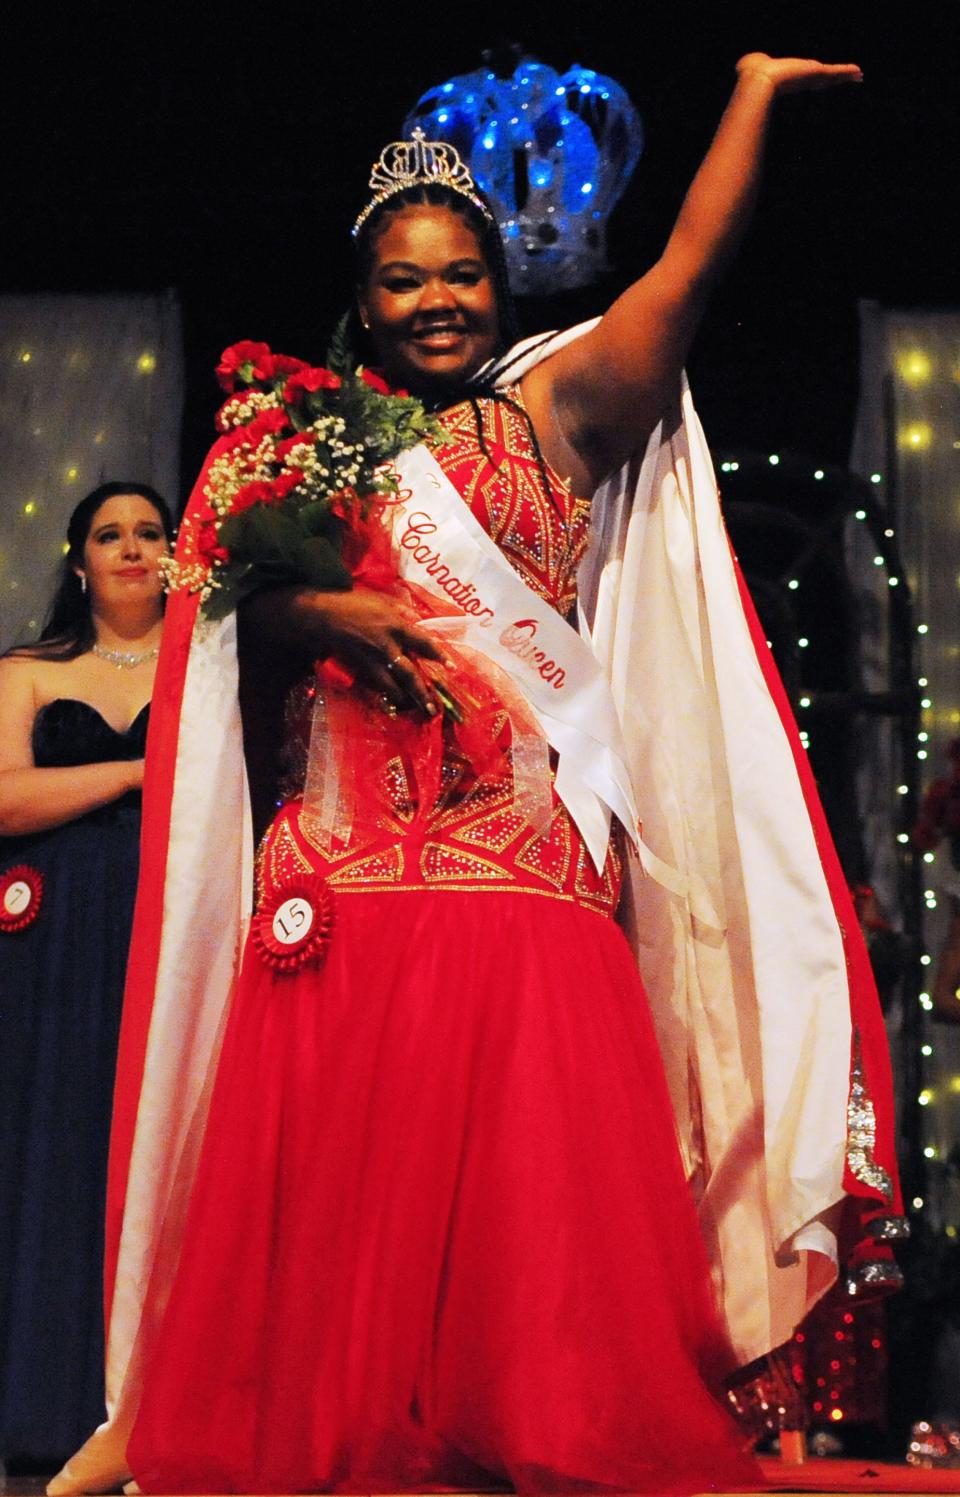 Kayla Martin waves to the crowd after being crowned as the 2022 Greater Alliance Carnation Festival queen Saturday, July 30, 2022, at Alliance High School.  She will reign over the 62nd Carnation Festival, which gets underway Aug. 4.